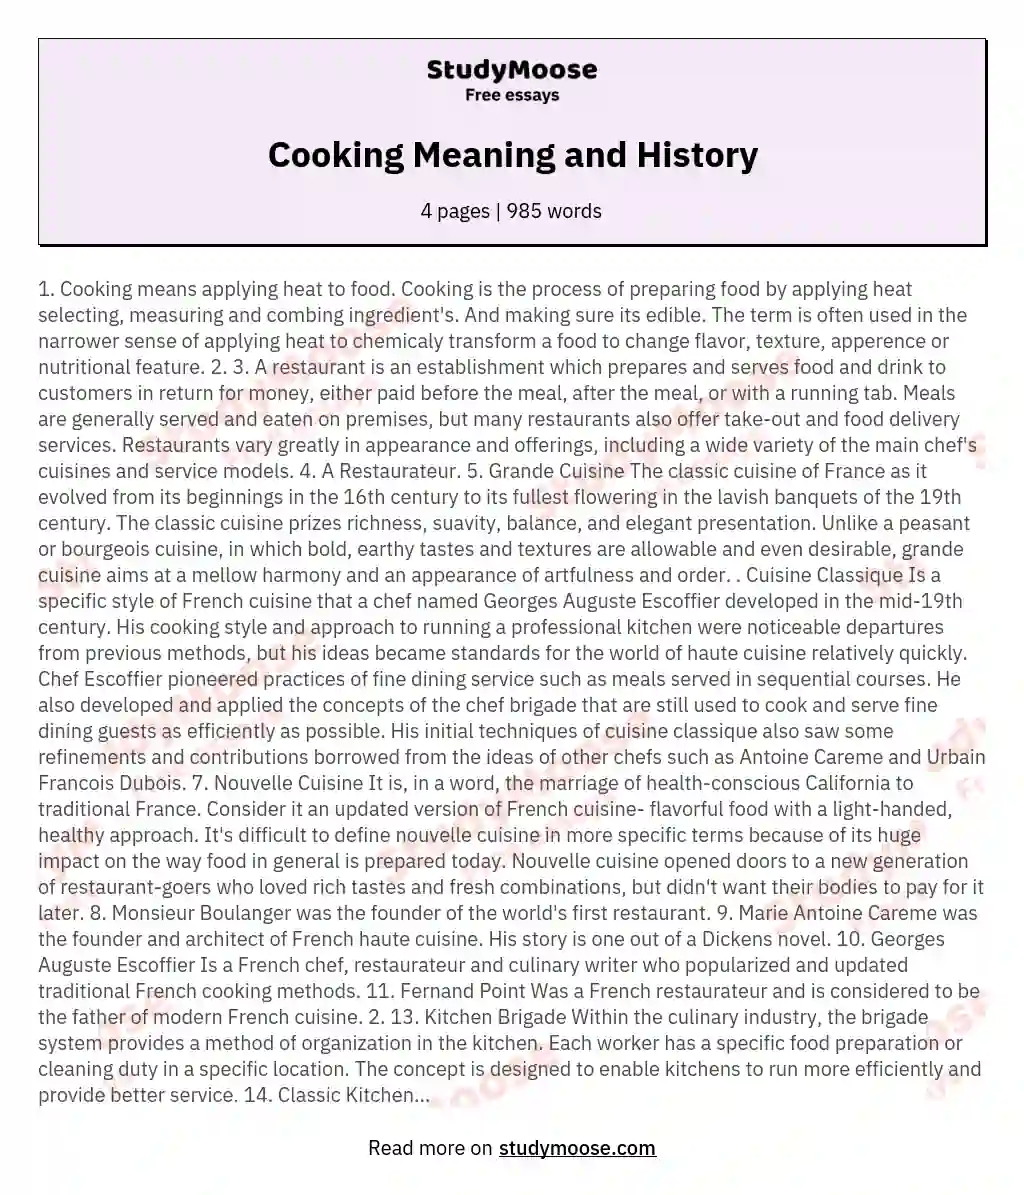 Cooking Meaning and History essay